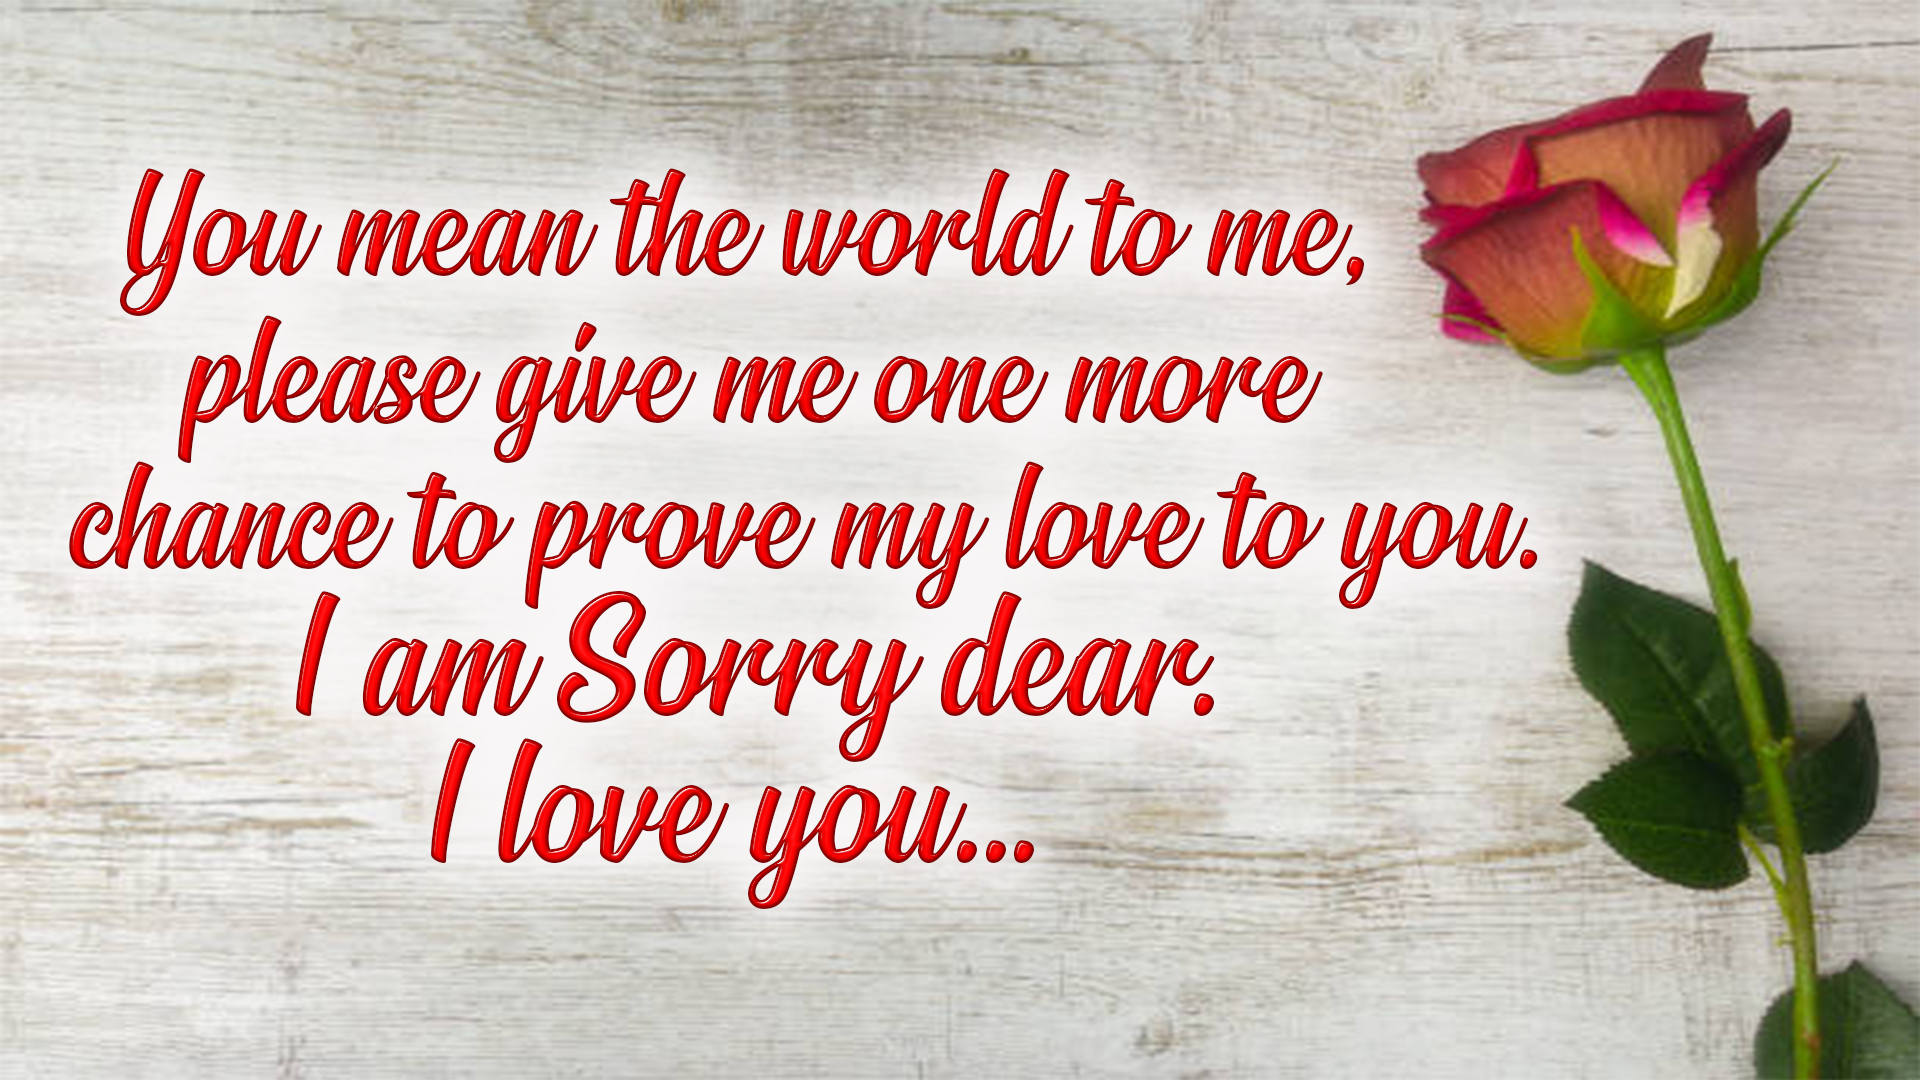 Sad heartfelt sorry messages quotes with images